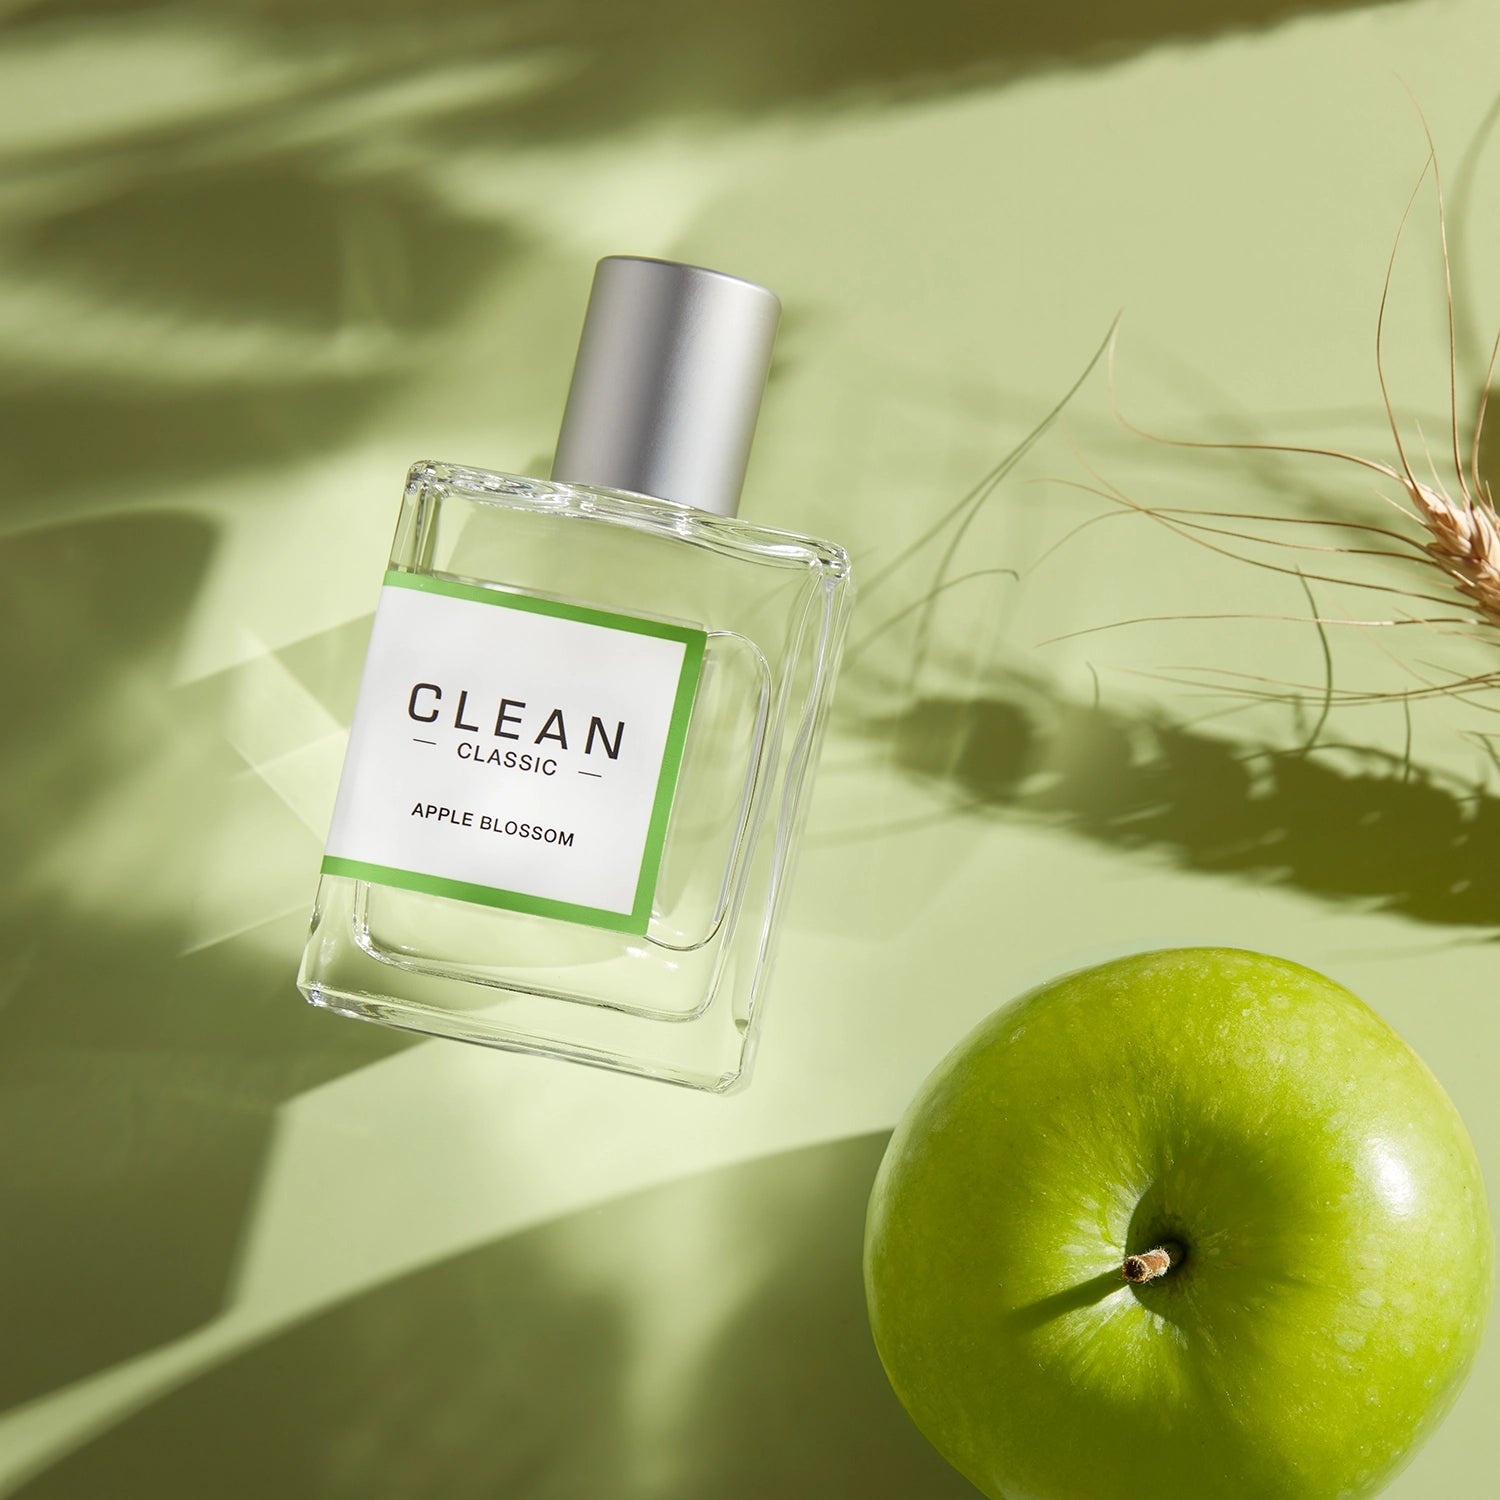 Clean Classic Apple Blossom fragrance with apple